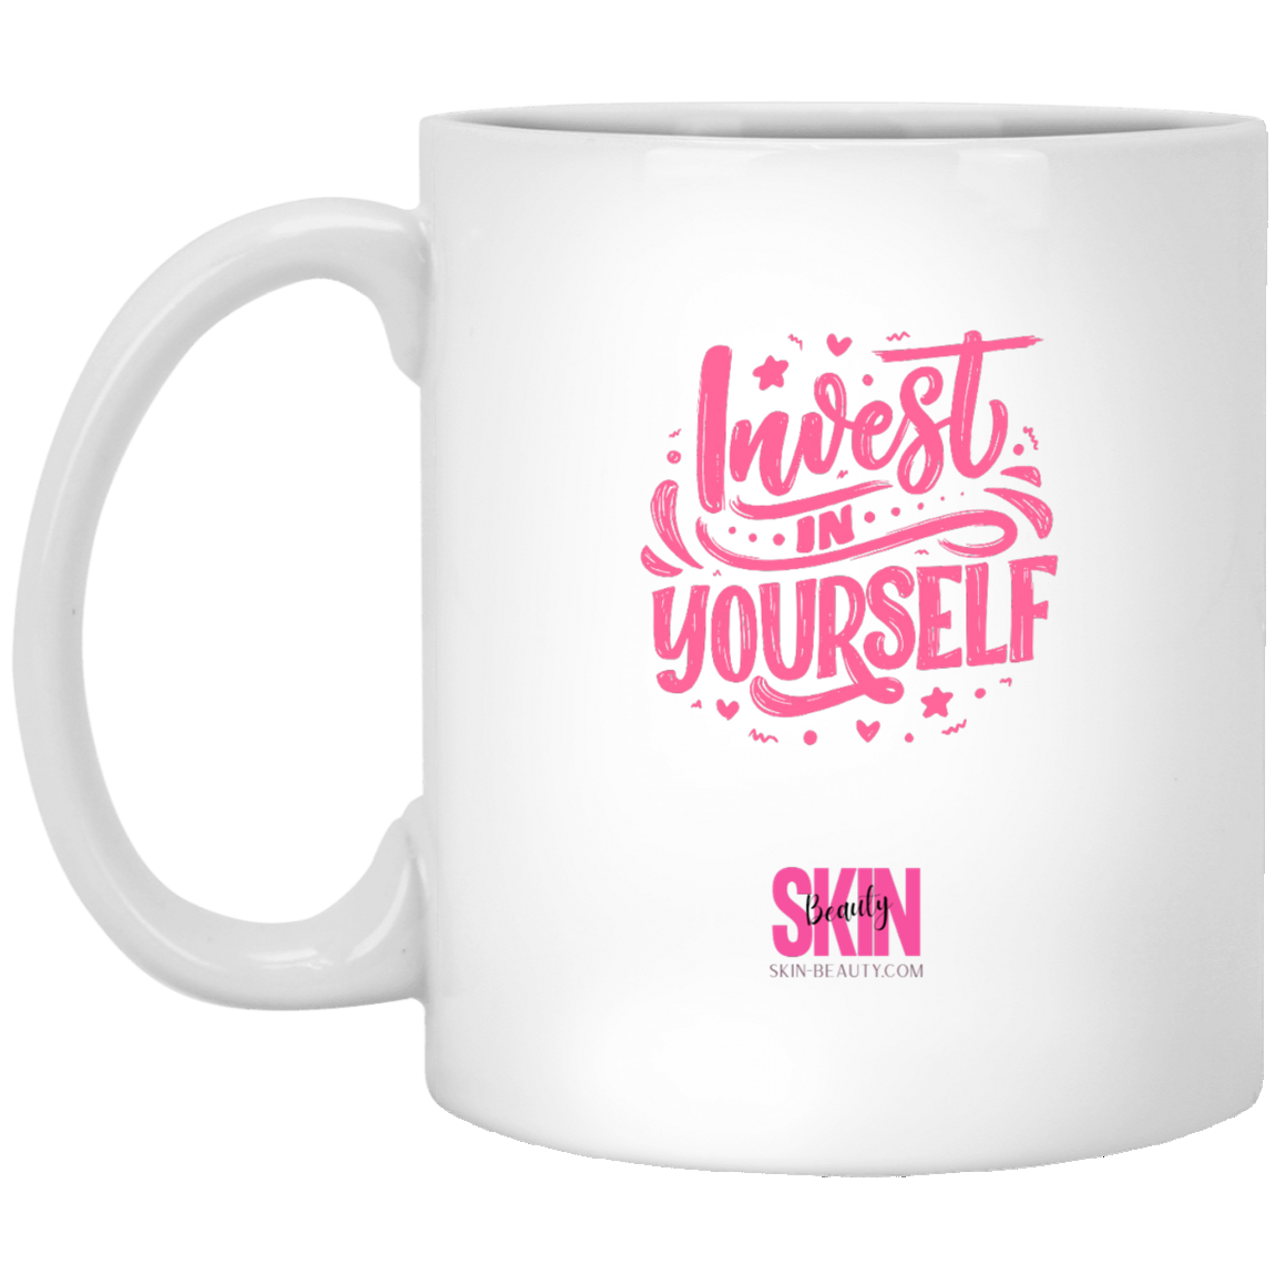 Invest in Yourself 11 oz. Mug